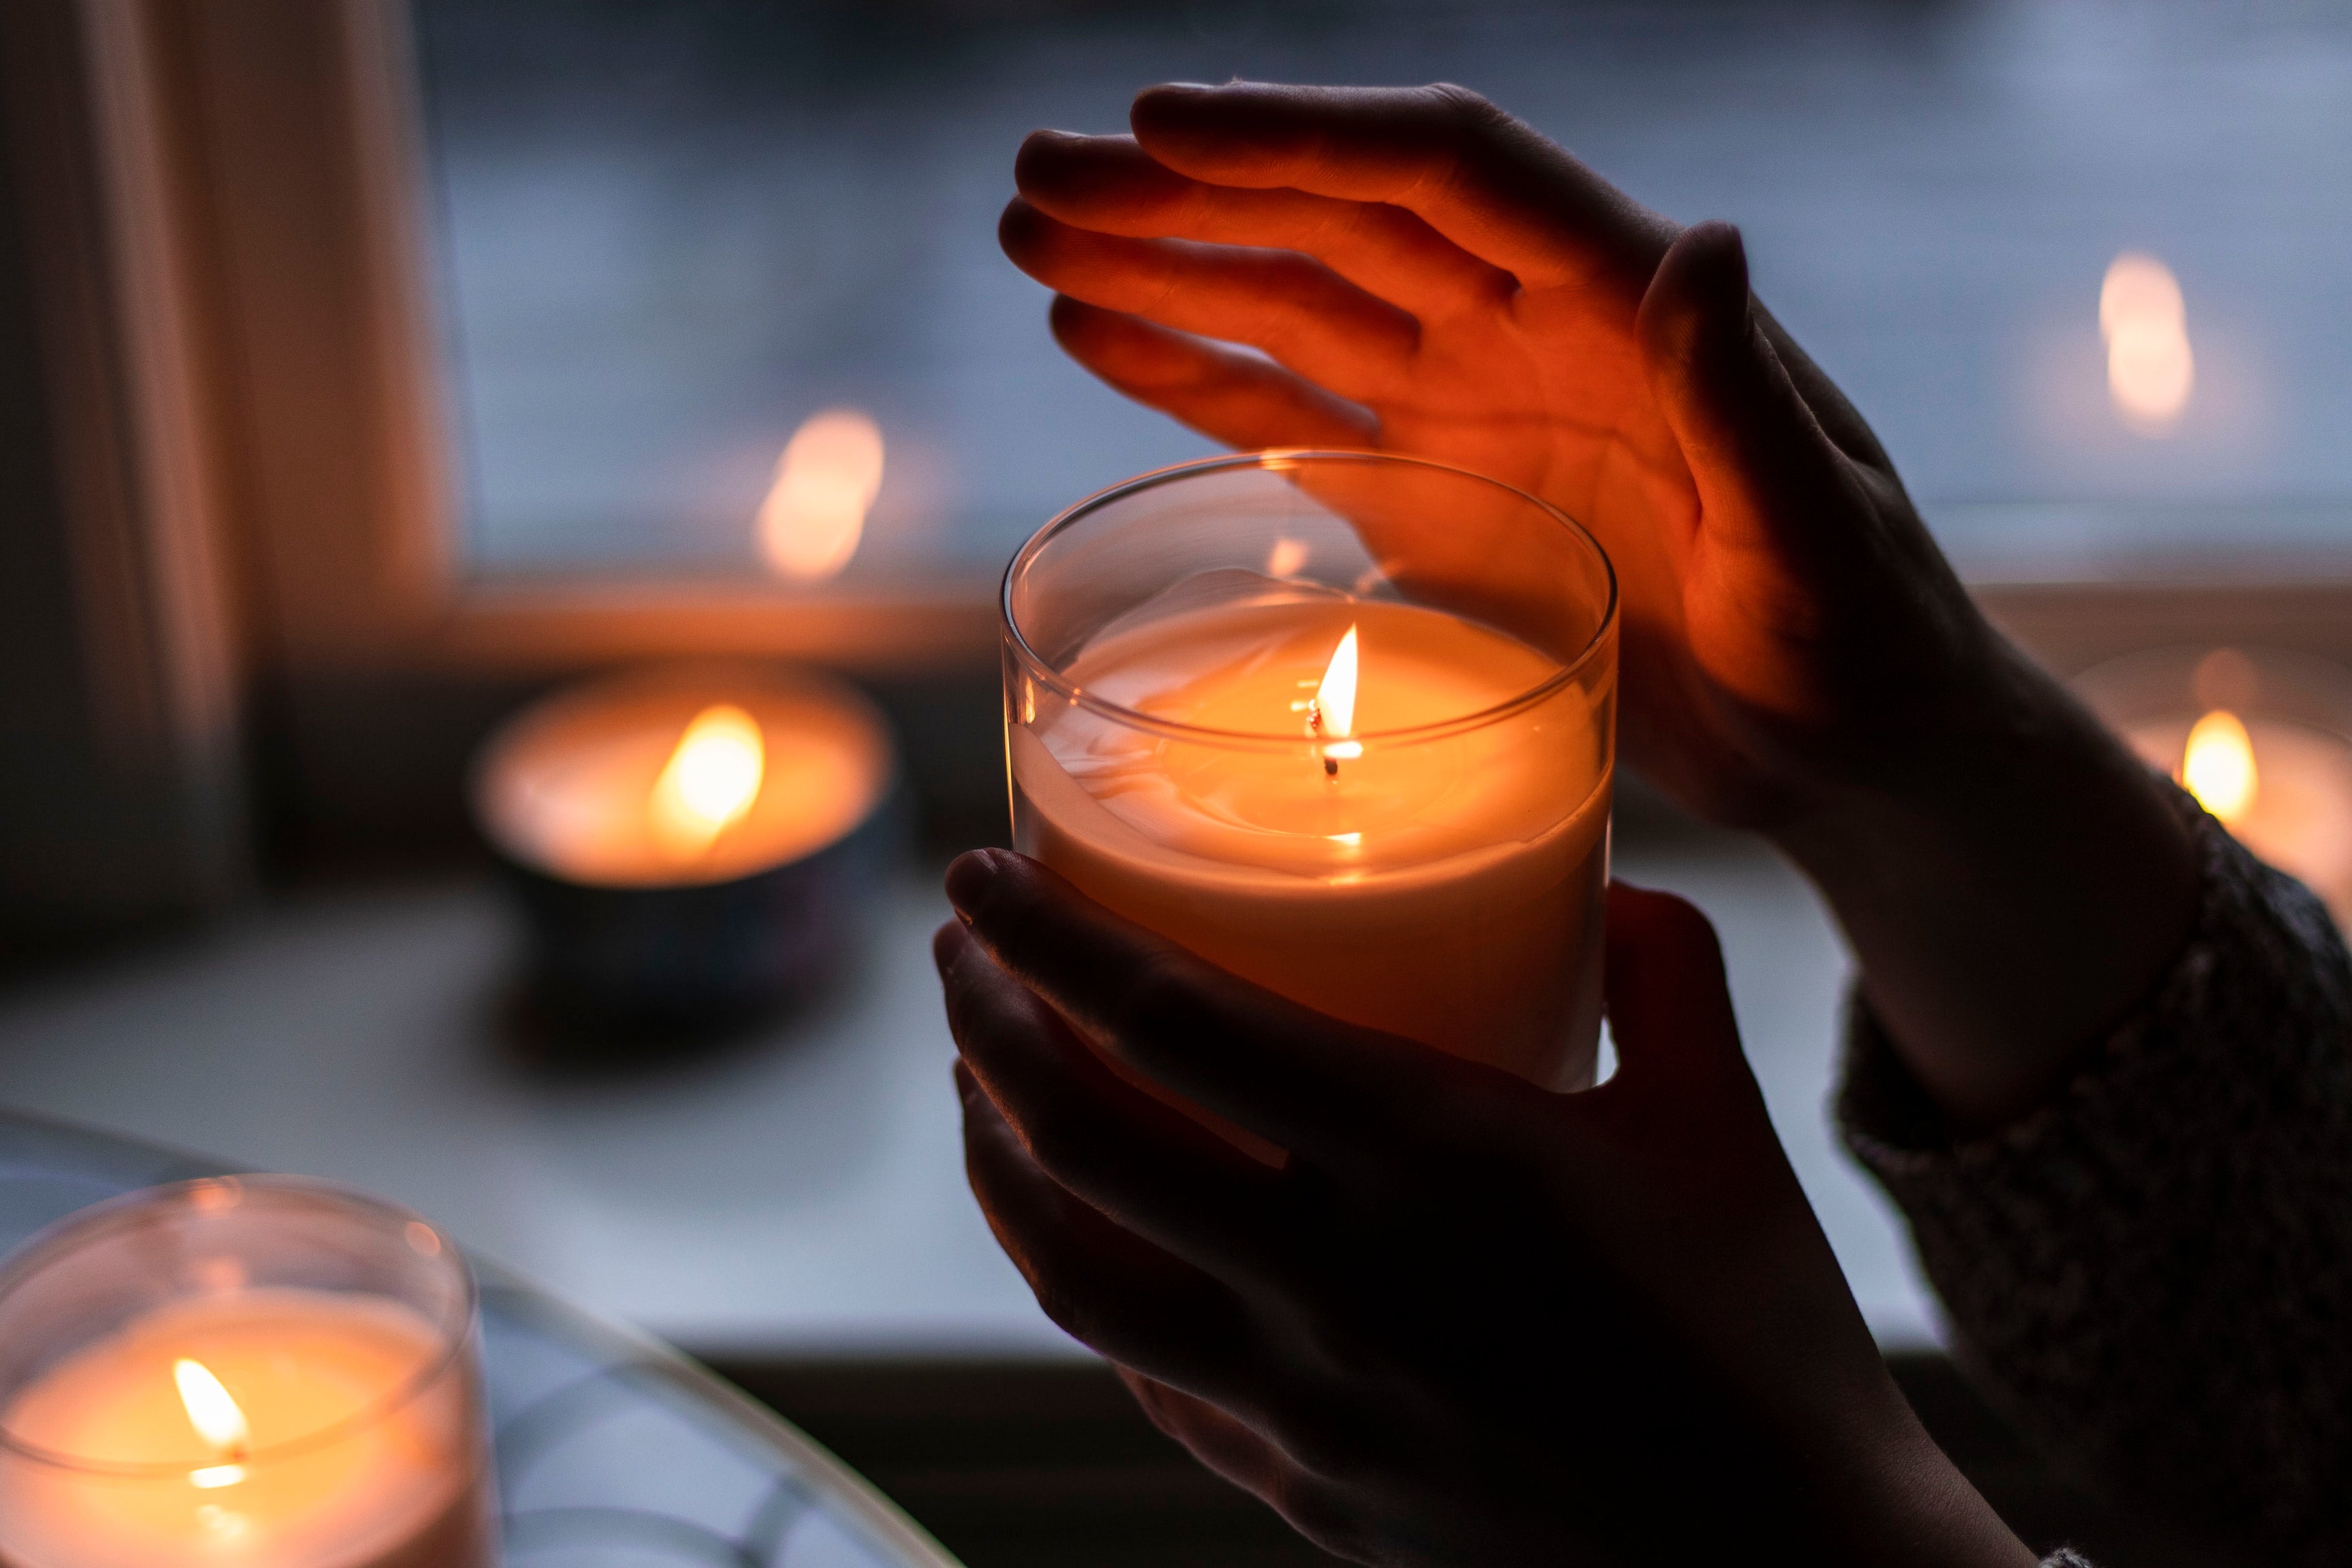 hands holding a unity candle at a wedding ceremony with candles burning in background